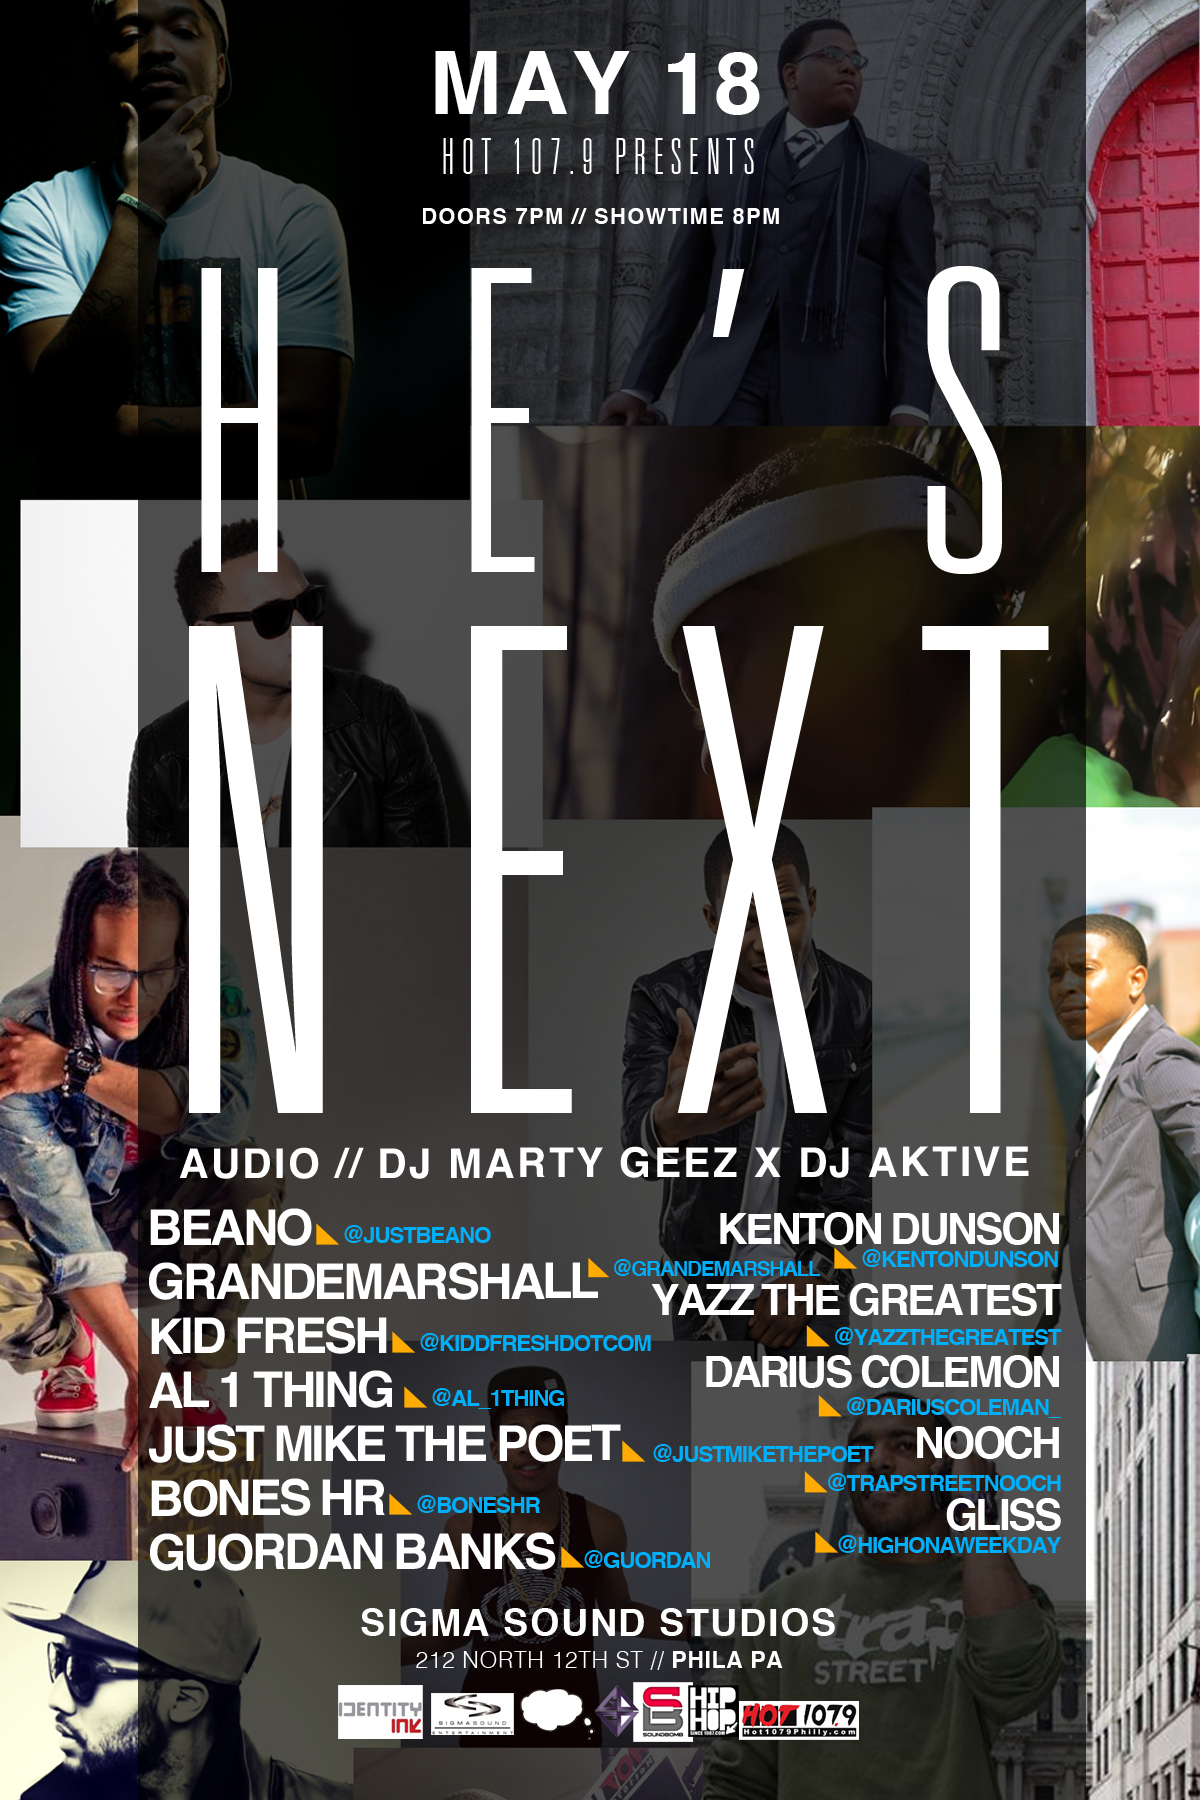 HENEXT Hot 107.9 Presents He's Next (May 18th @ Sigma Sounds)  